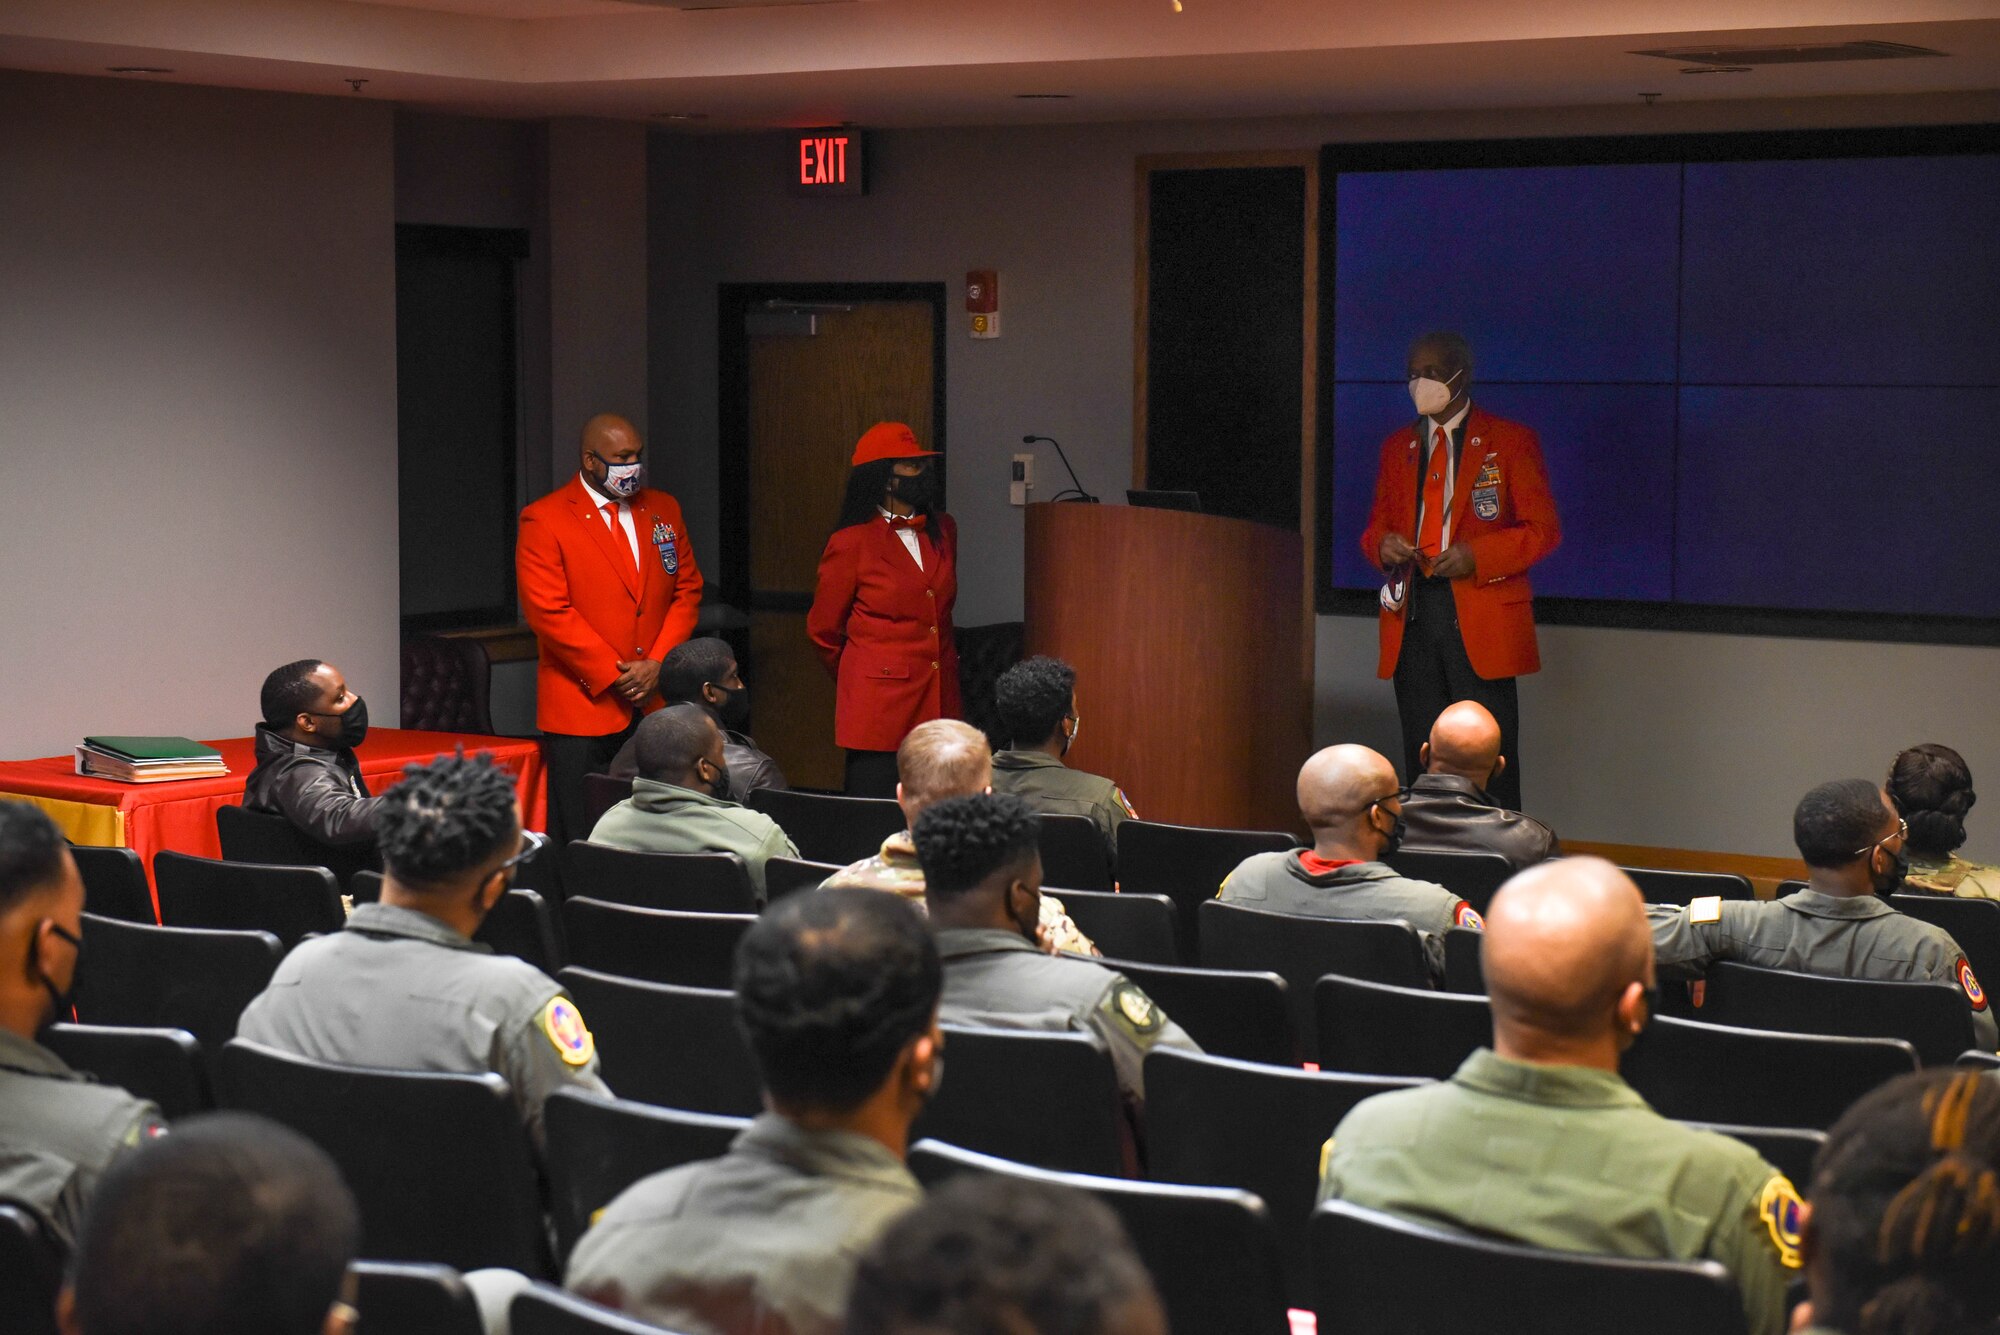 Members of Tuskegee Airmen Inc. speak to a room of black enlisted Airmen on Joint Base Charleston, S.C., Feb. 19, 2021. The Tuskegee Airmen were invited to an event hosted at Joint Base Charleston honoring the contributions and heritage of black Airmen. (U.S. Air Force photo by Senior Airman Mikayla Heineck)